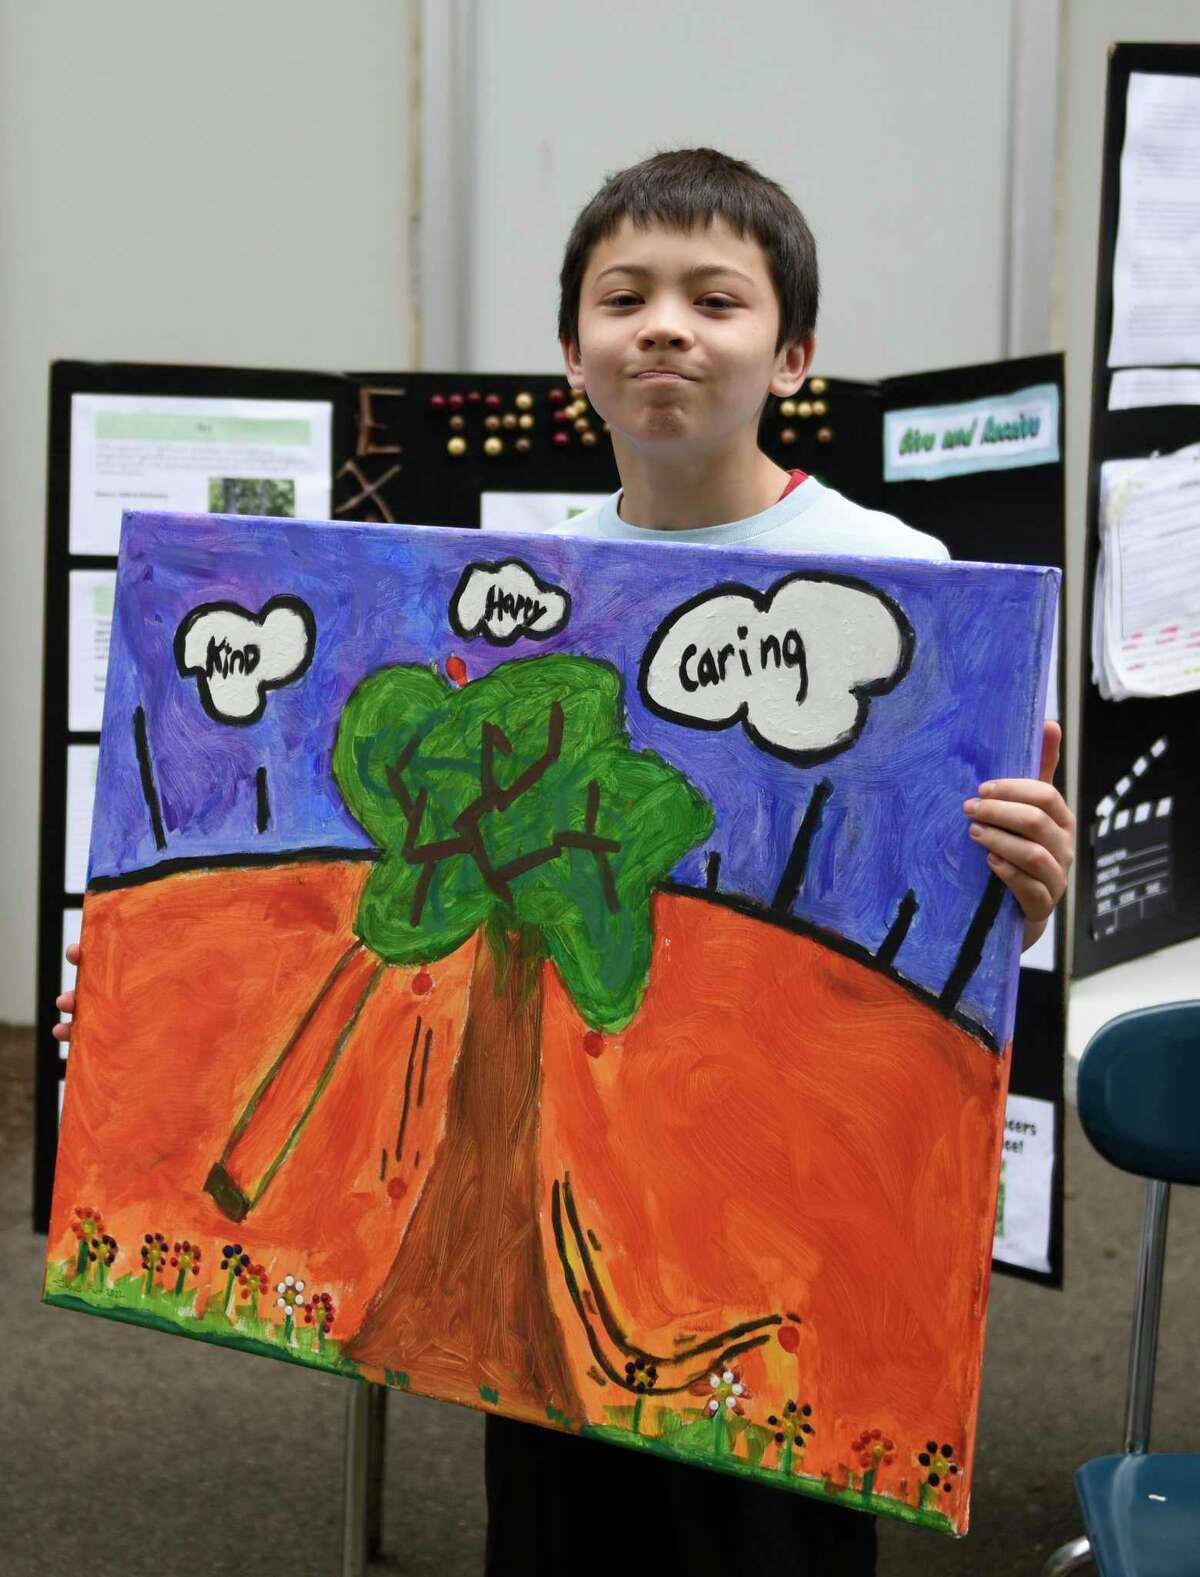 Fifth-grader Isaac Farr presents Greenwich Police officers with a painting about his Art Expression research project at the International School in Dundee, Riverside, Greenwich, Connecticut, Tuesday, June 21, 2022. Farr's research project was on Art and Gratitude and created a picture of the Greenwich Police Department to express his gratitude through art.